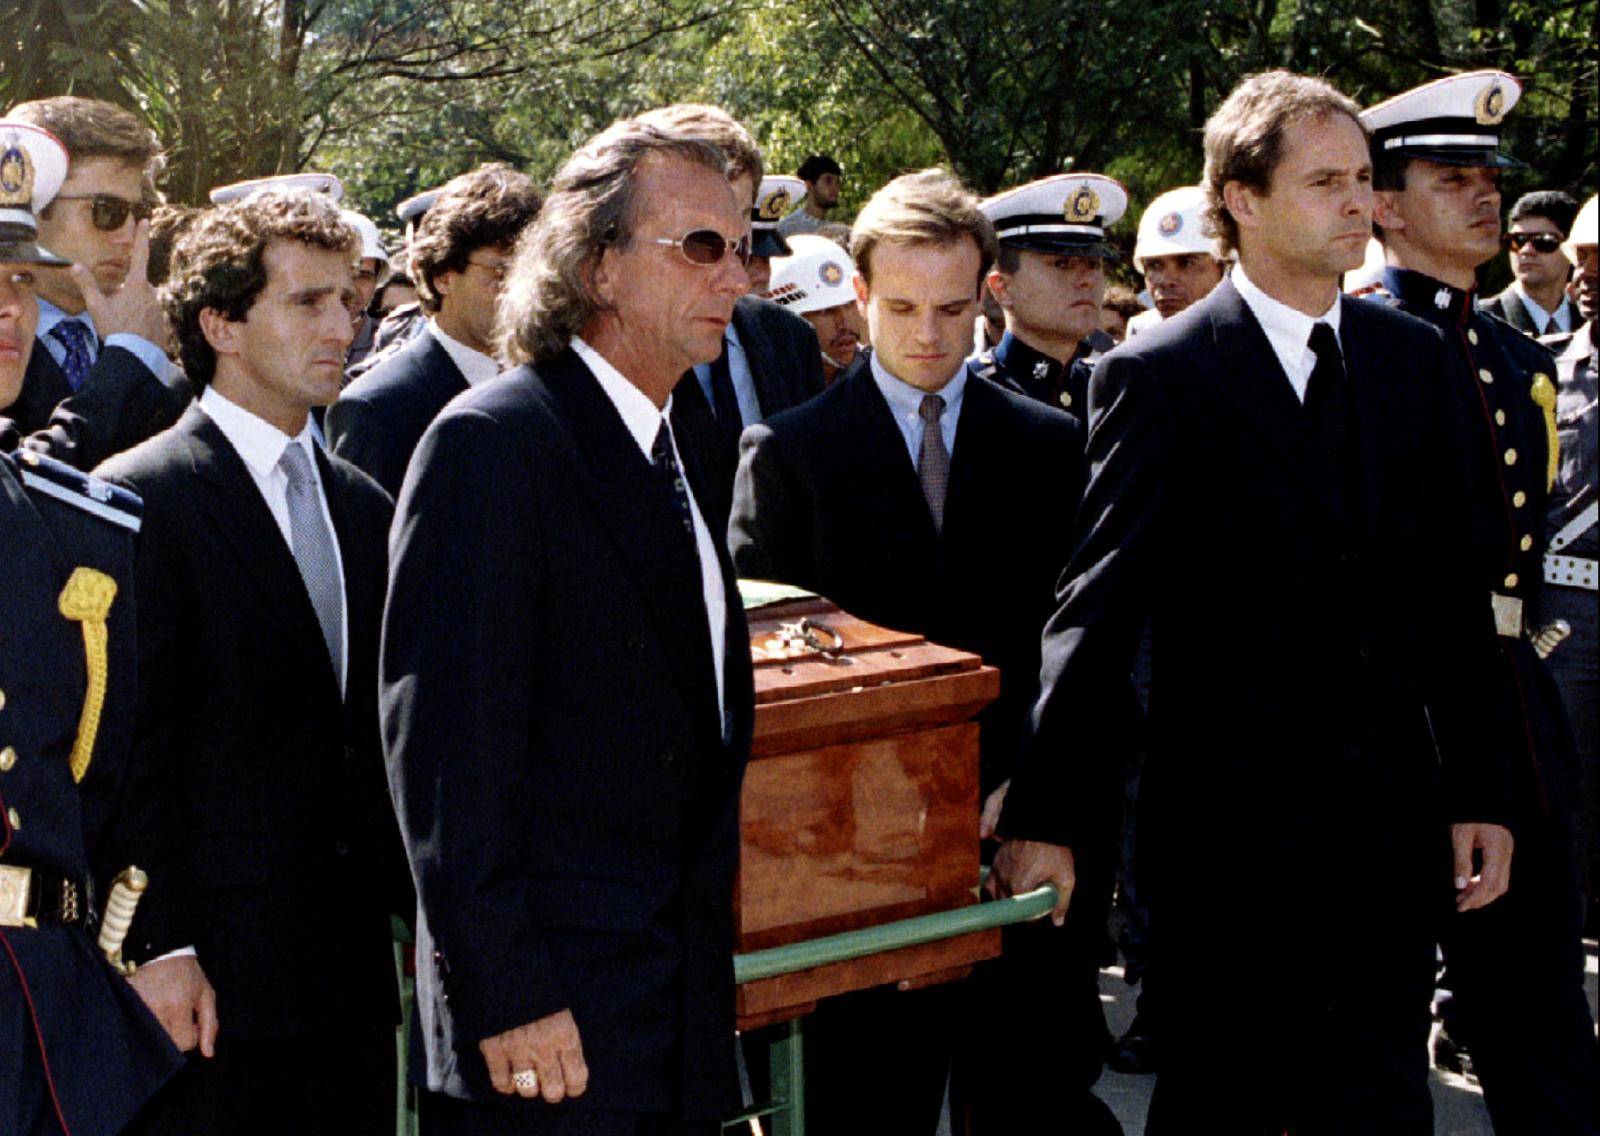 FILE PHOTO: Former Formula One racing champions carry Ayrton Senna's coffin to his grave during the funeral in Brazil